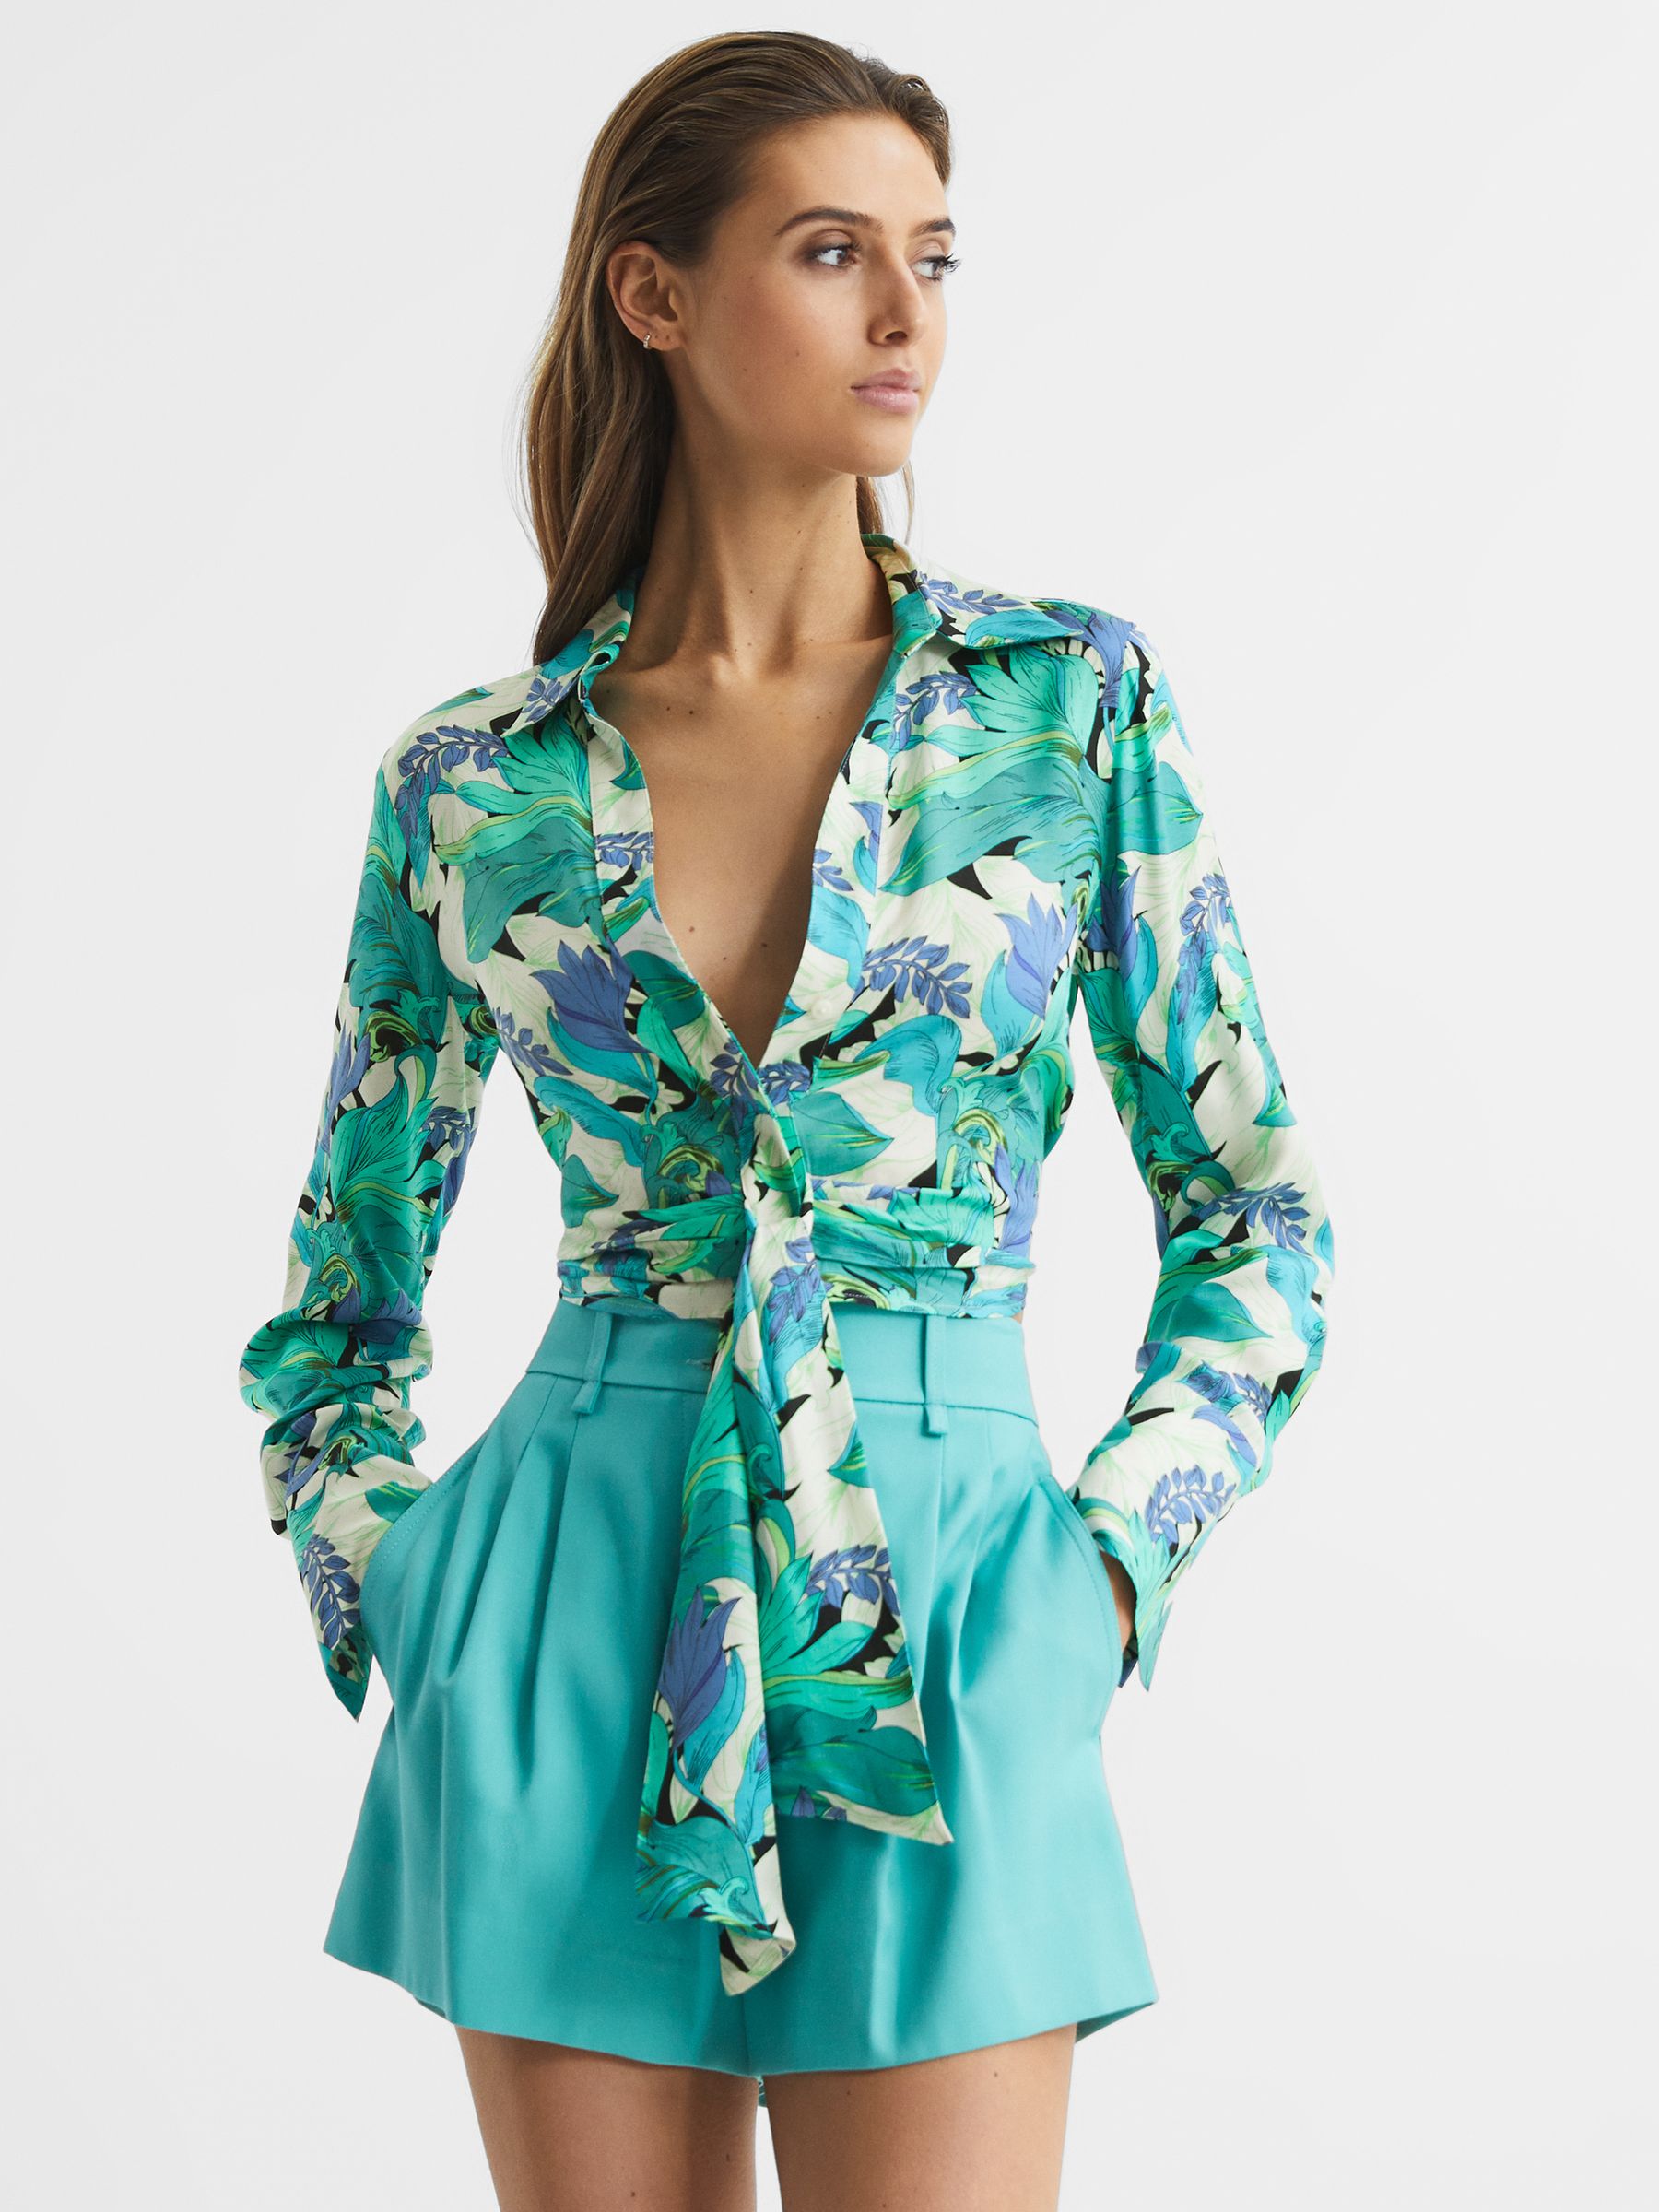 Reiss Dana Floral Print Tie Front Cropped Blouse | REISS USA